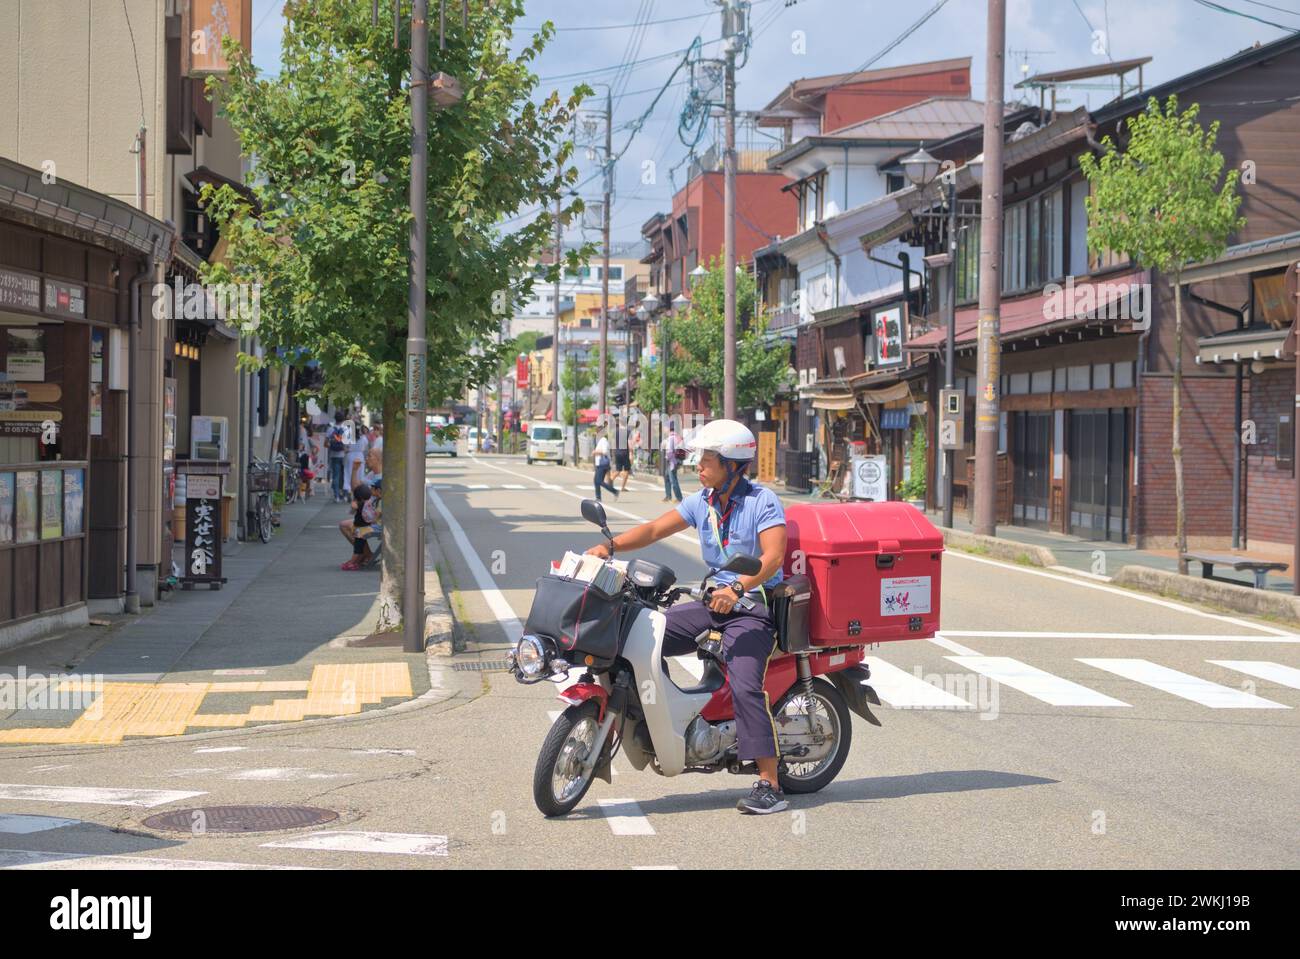 Japanese postman on a motorcycle in the streets of Takayama on a sunny summer day. Japan, Takayama, 08 29 2019. Stock Photo